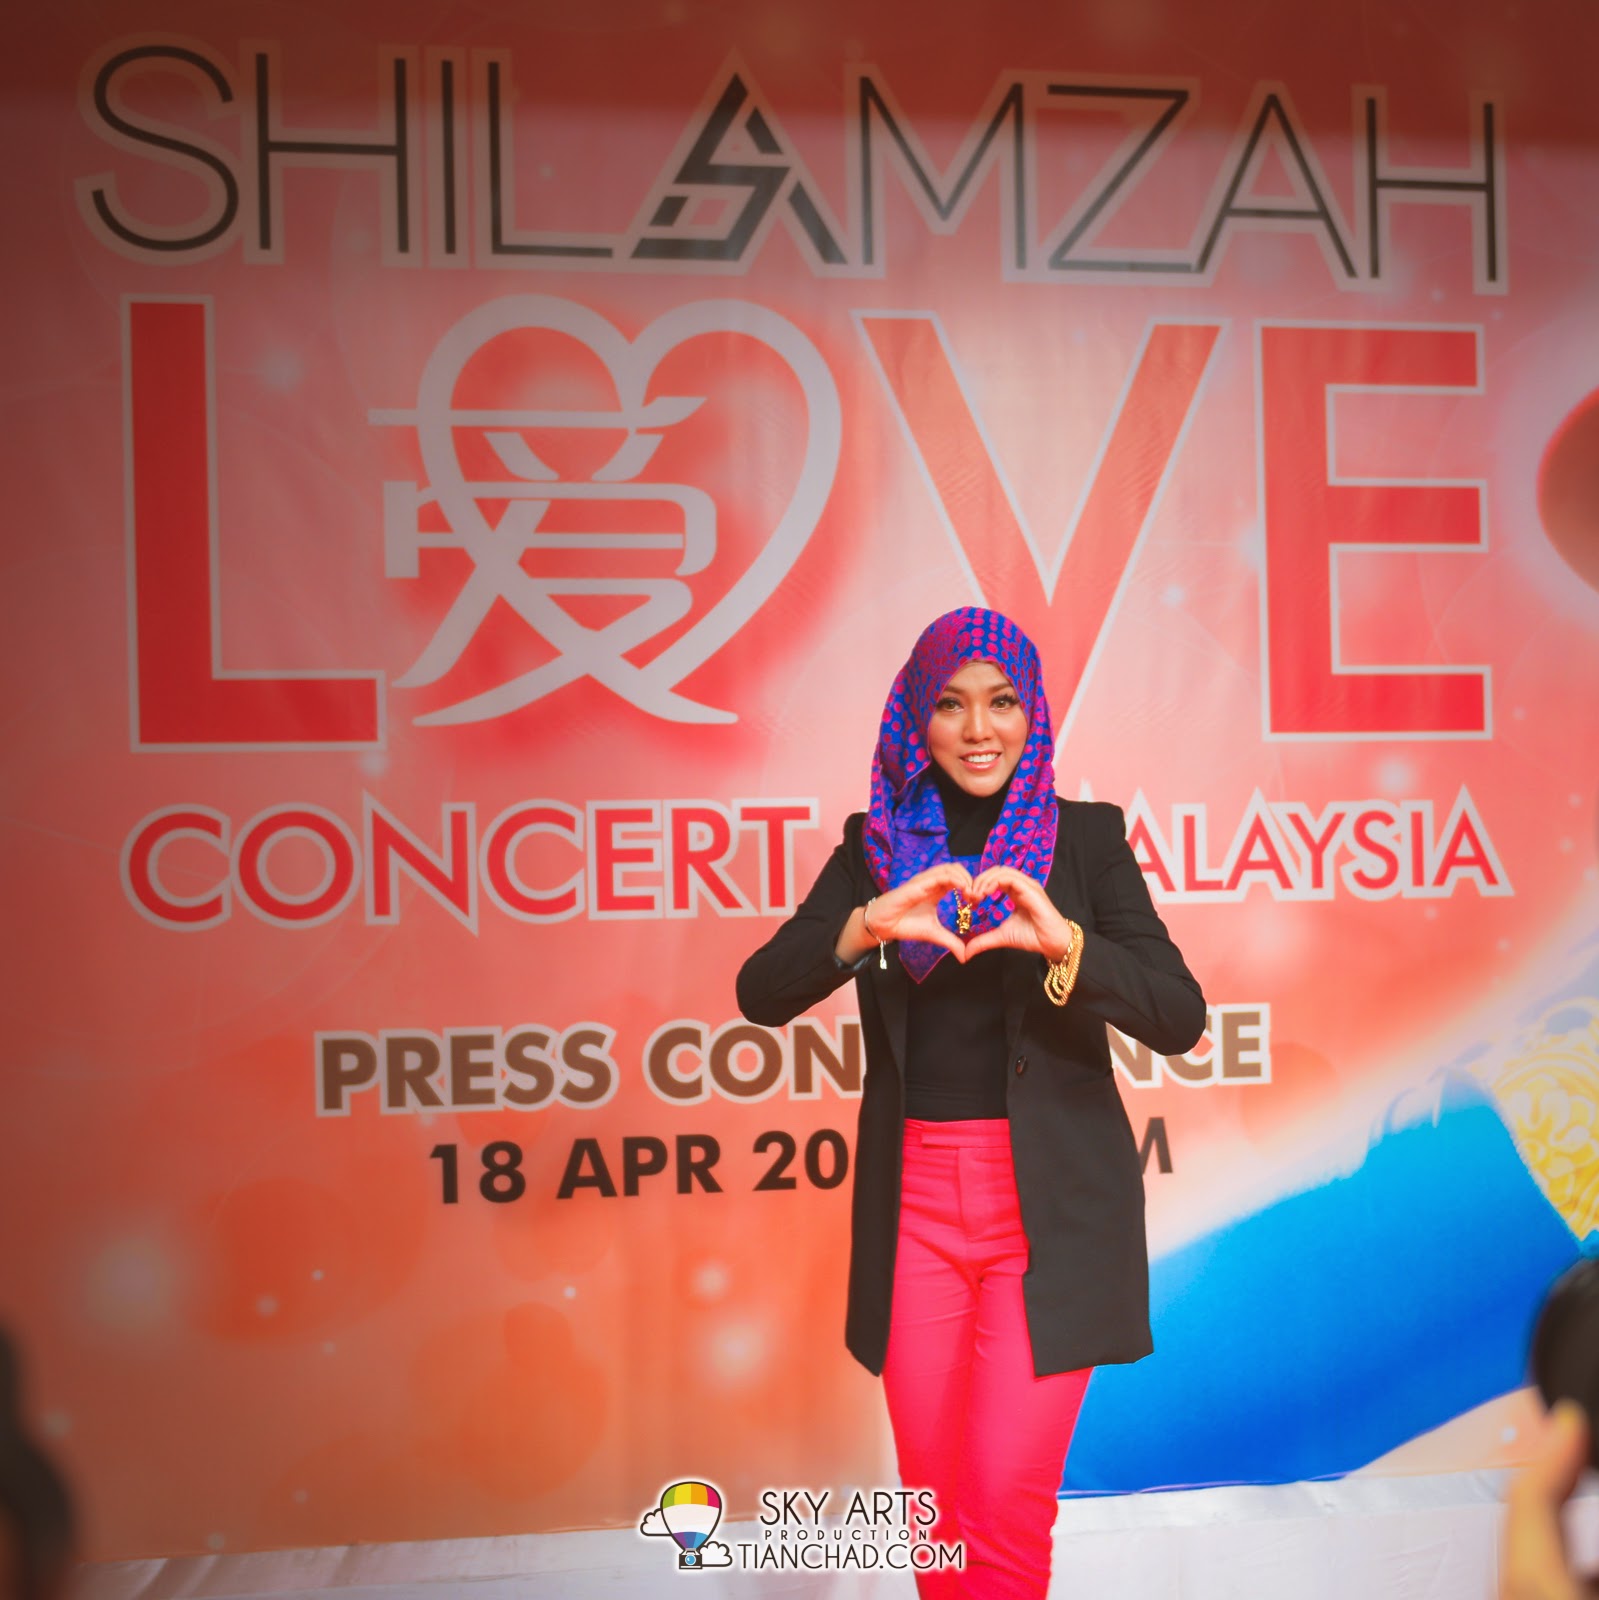 Here's LOVE to all the fans around the world by Shila Amzah!! 